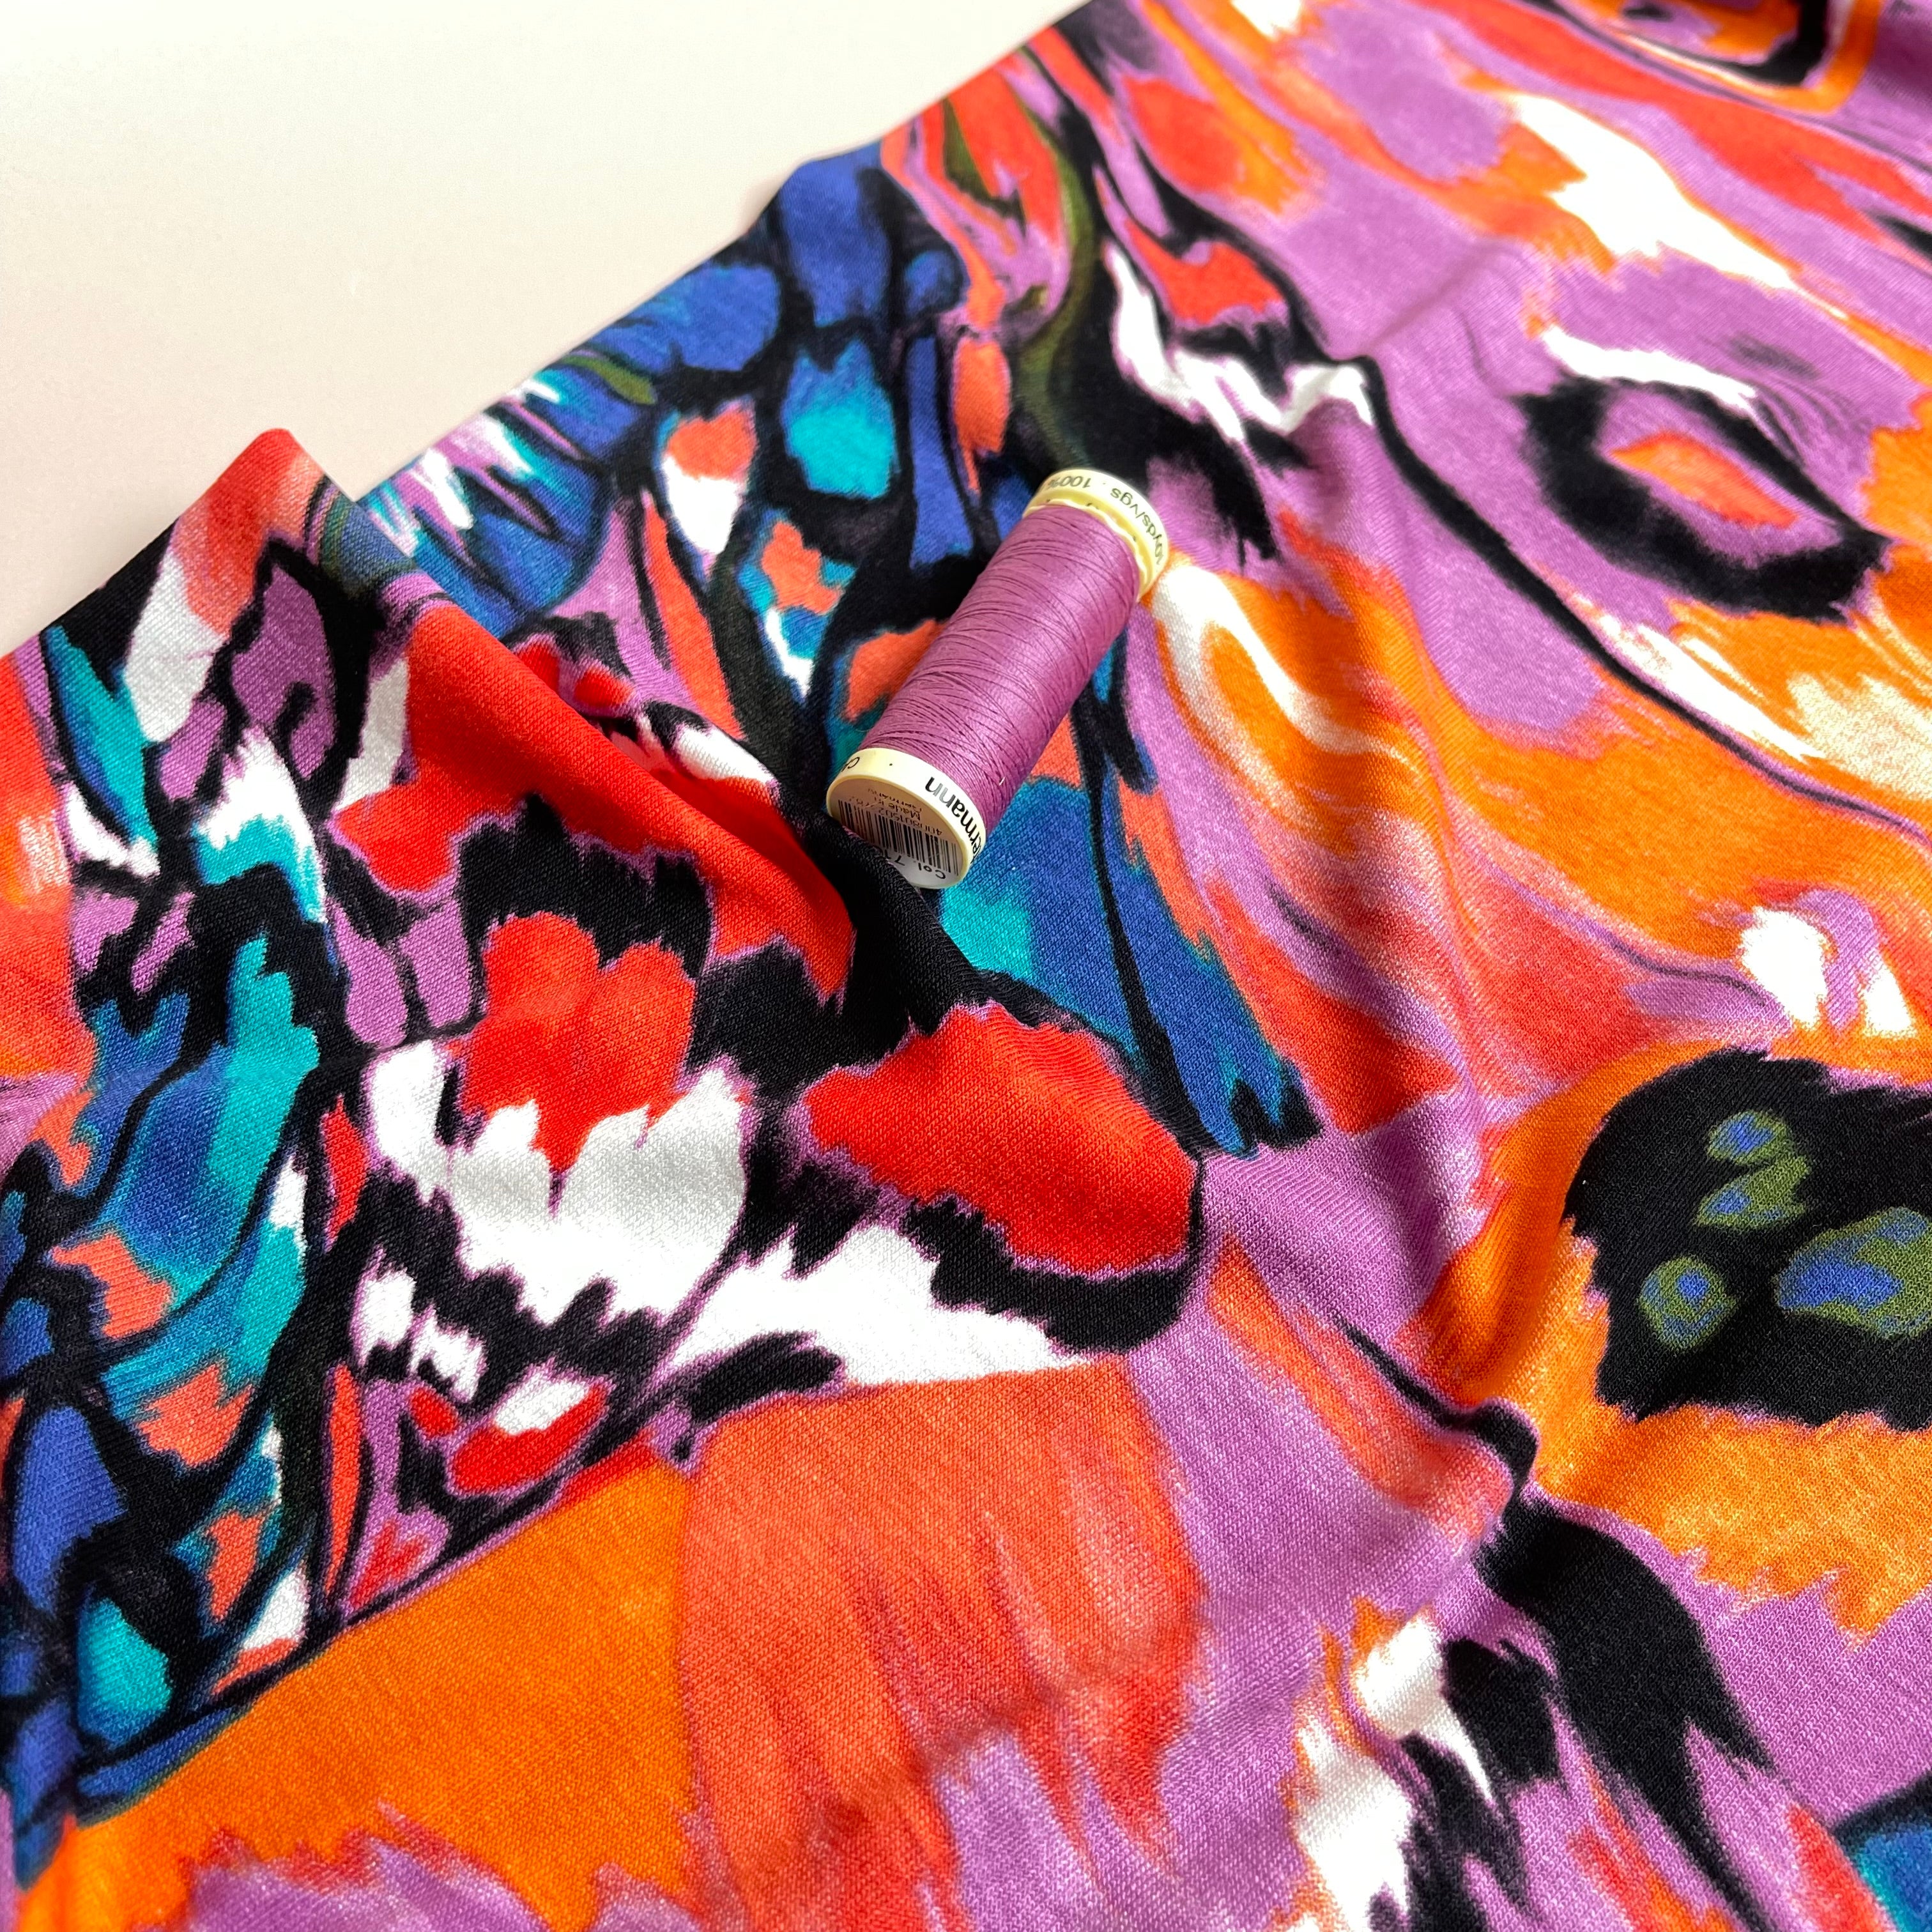 Butterfly Wings Orange and Lilac Viscose Jersey Fabric